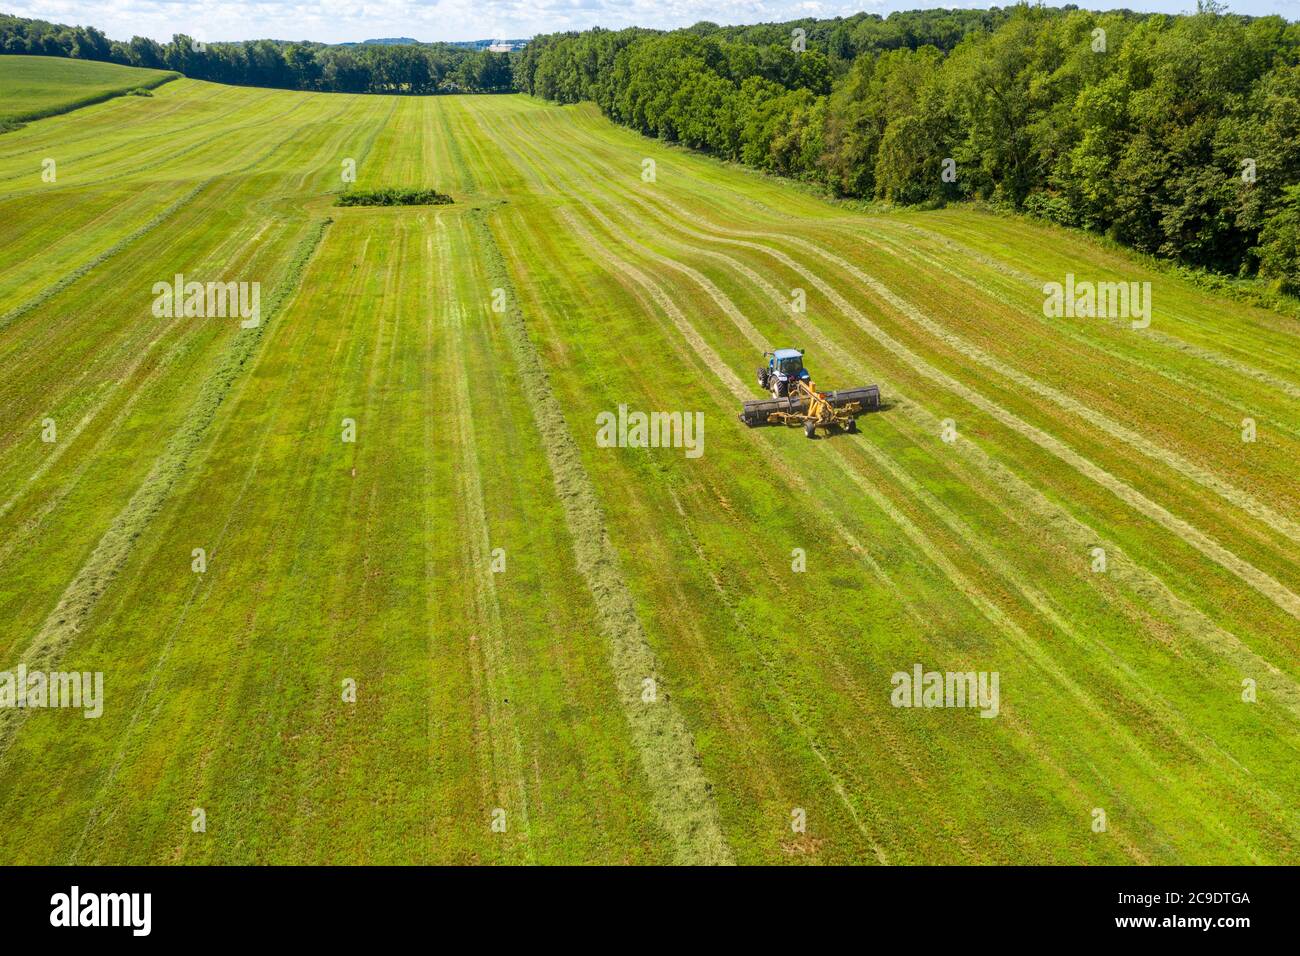 Hopkins, Michigan - A tractor pulls a hay rake through a field, piling the hay into windrows. Stock Photo